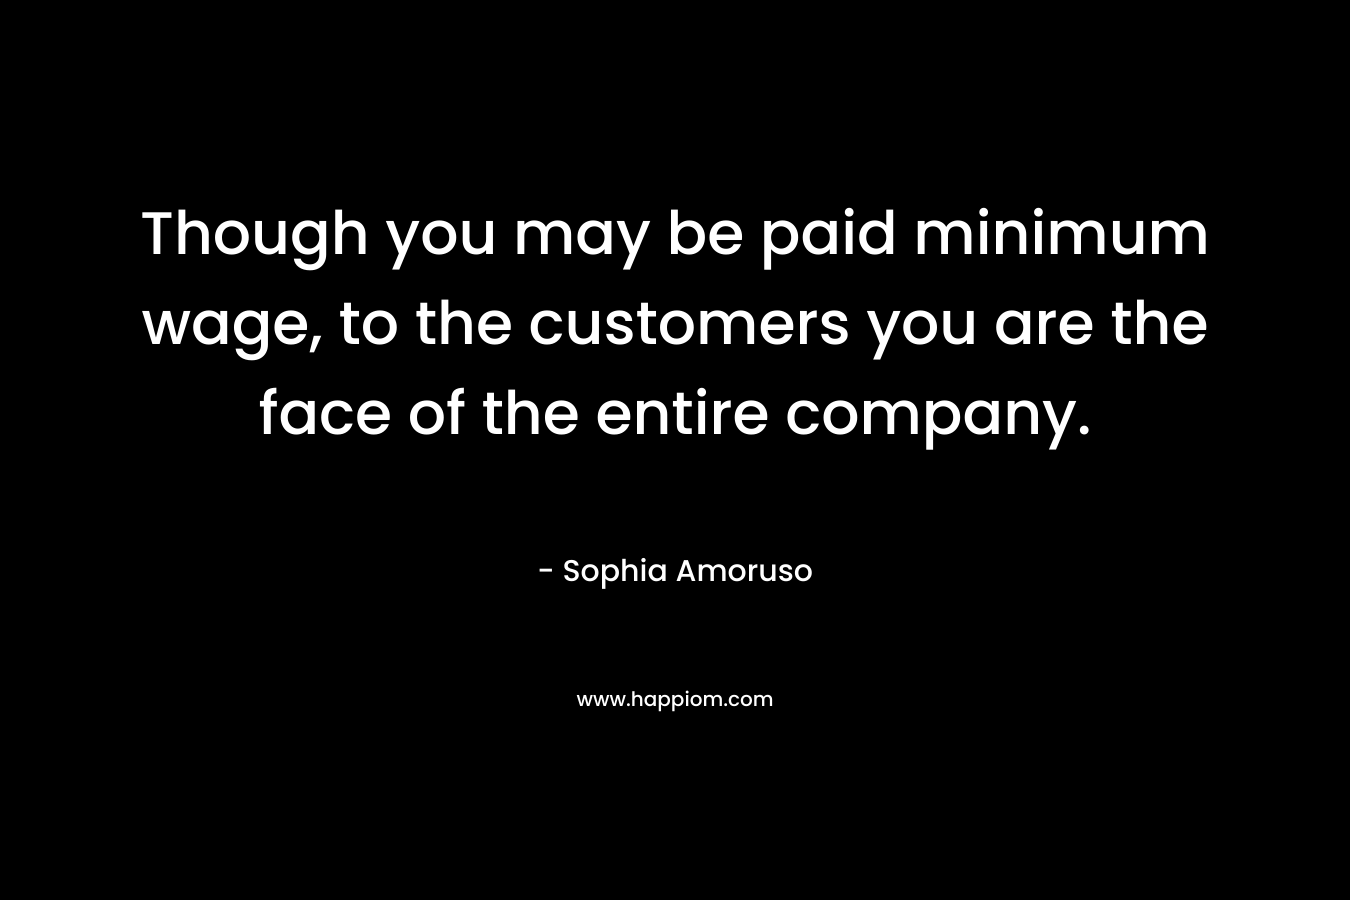 Though you may be paid minimum wage, to the customers you are the face of the entire company. – Sophia Amoruso